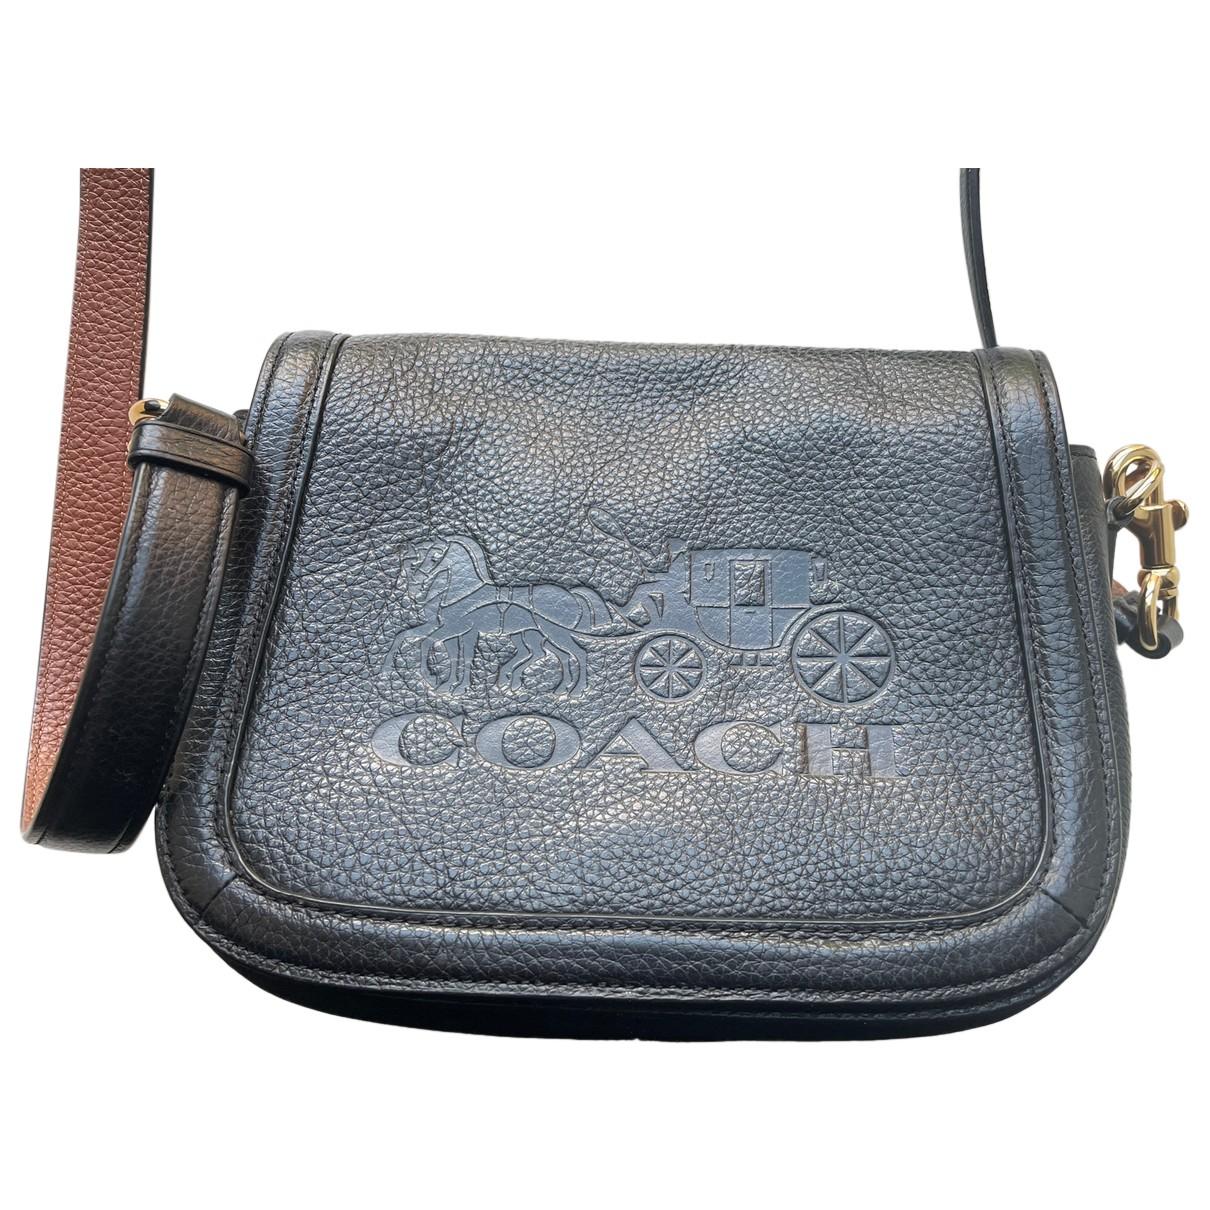 Leather crossbody bag Coach Black in Leather - 31498242